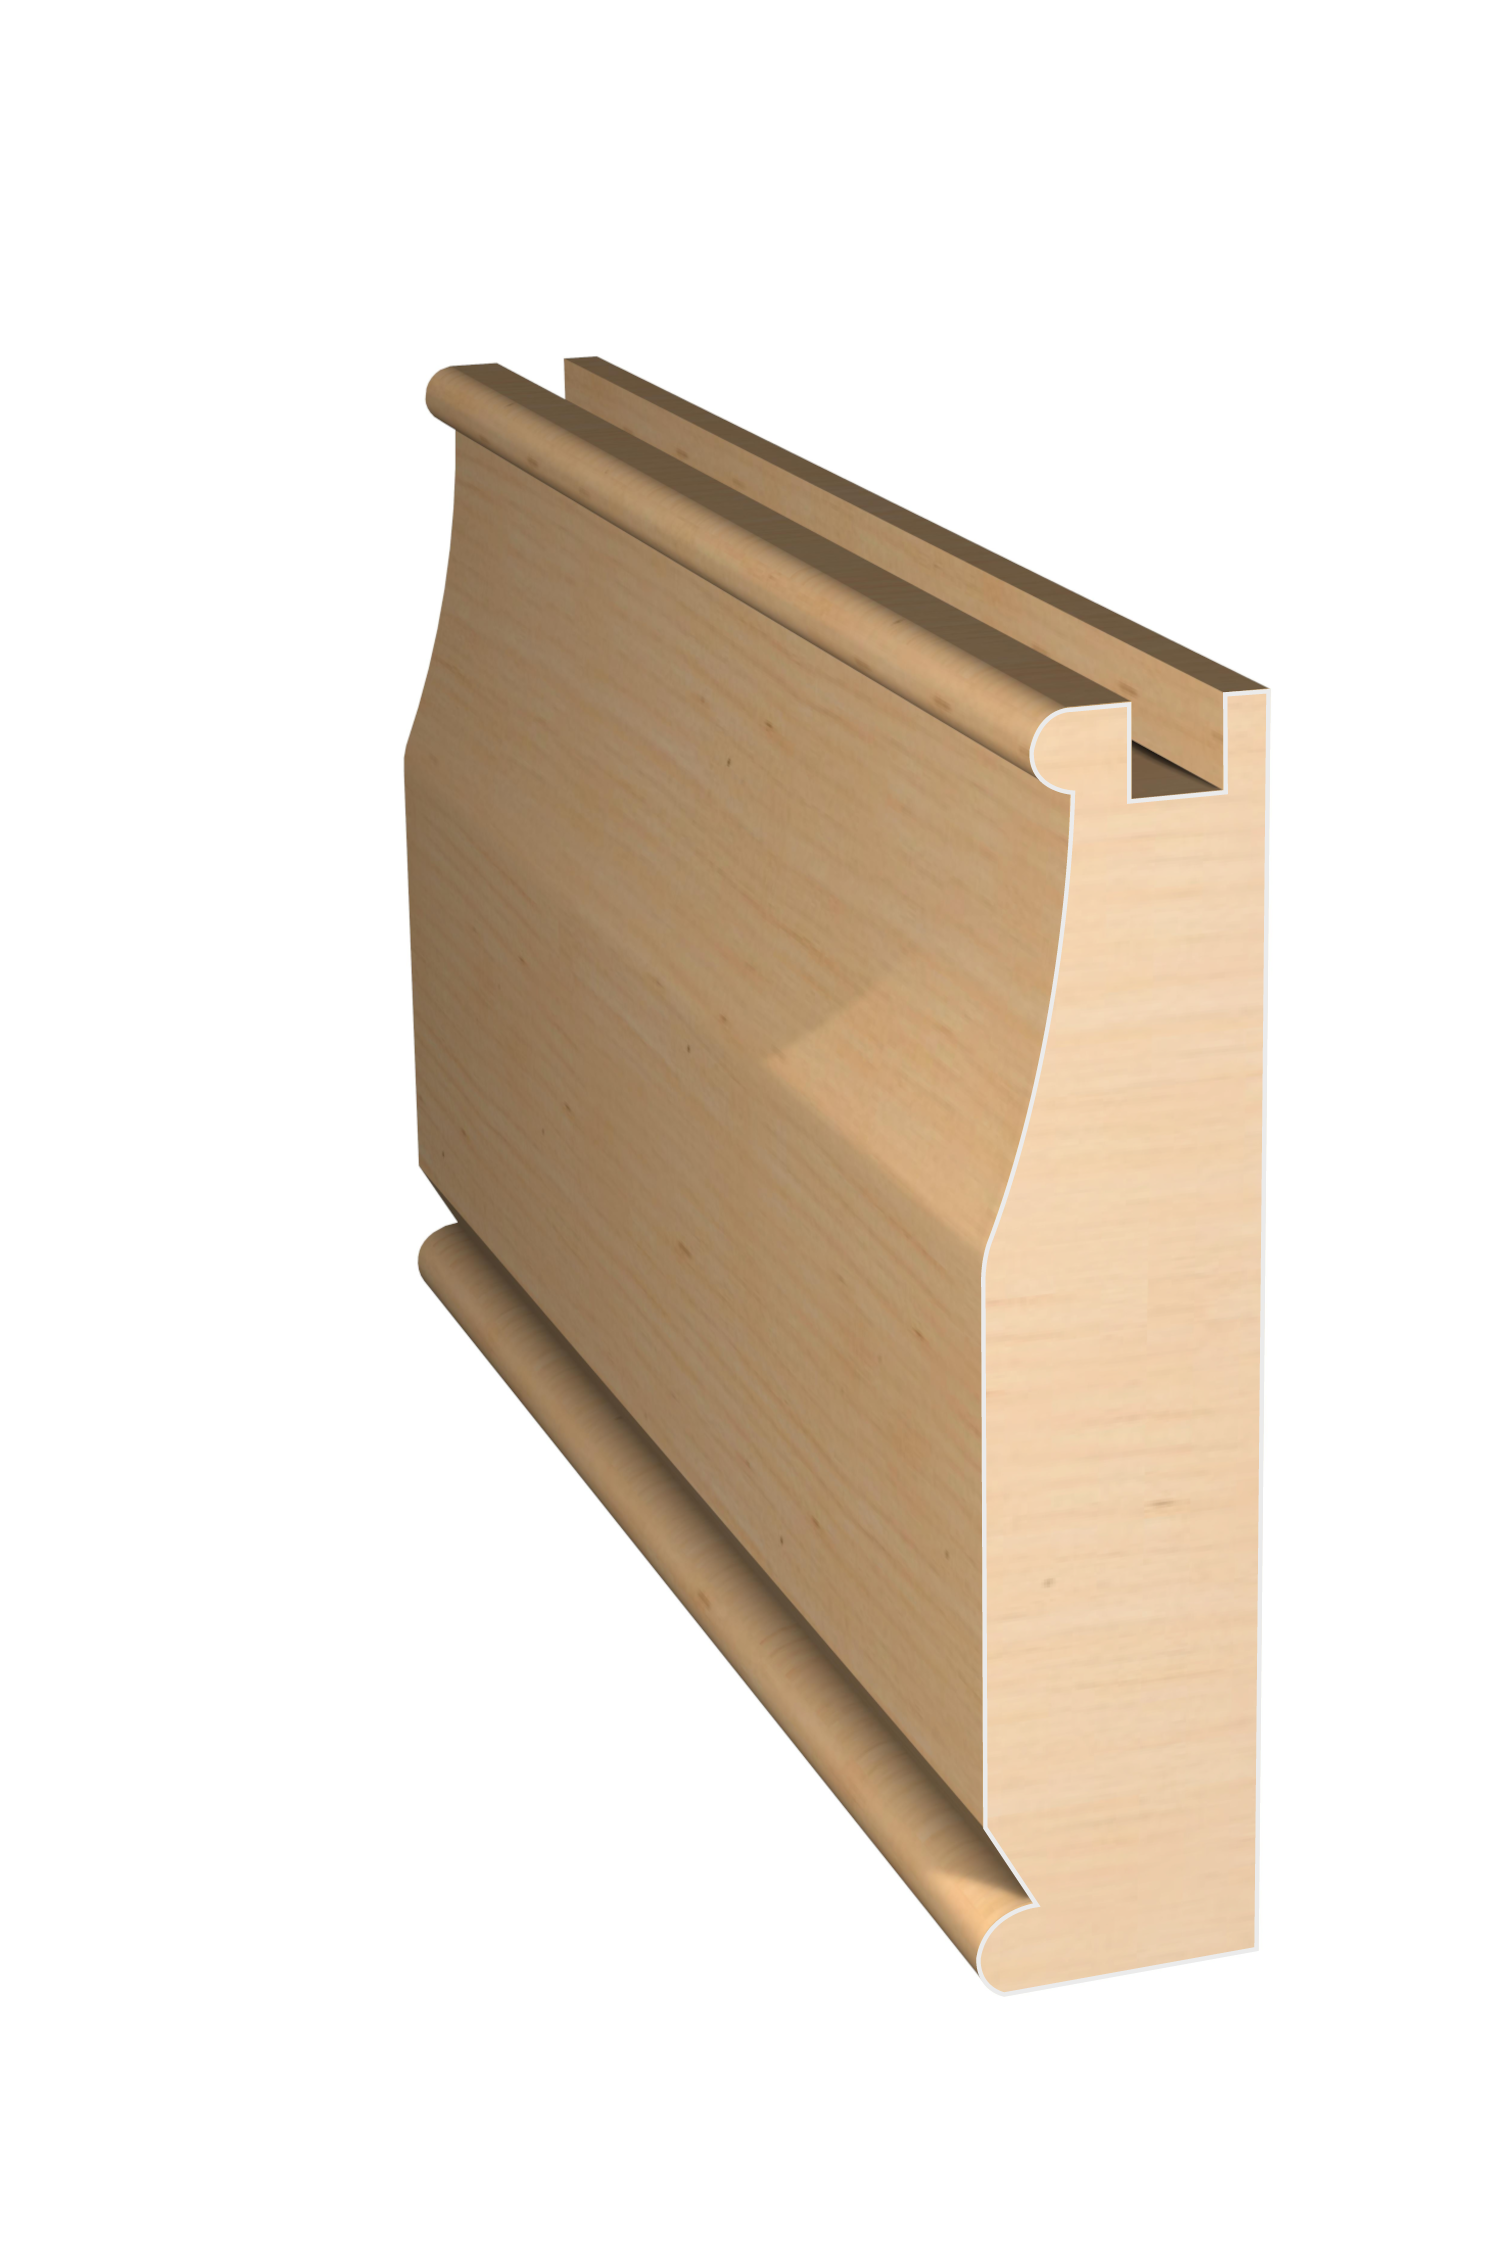 Three dimensional rendering of custom cabinet rail wood molding CABPL3121 made by Public Lumber Company in Detroit.